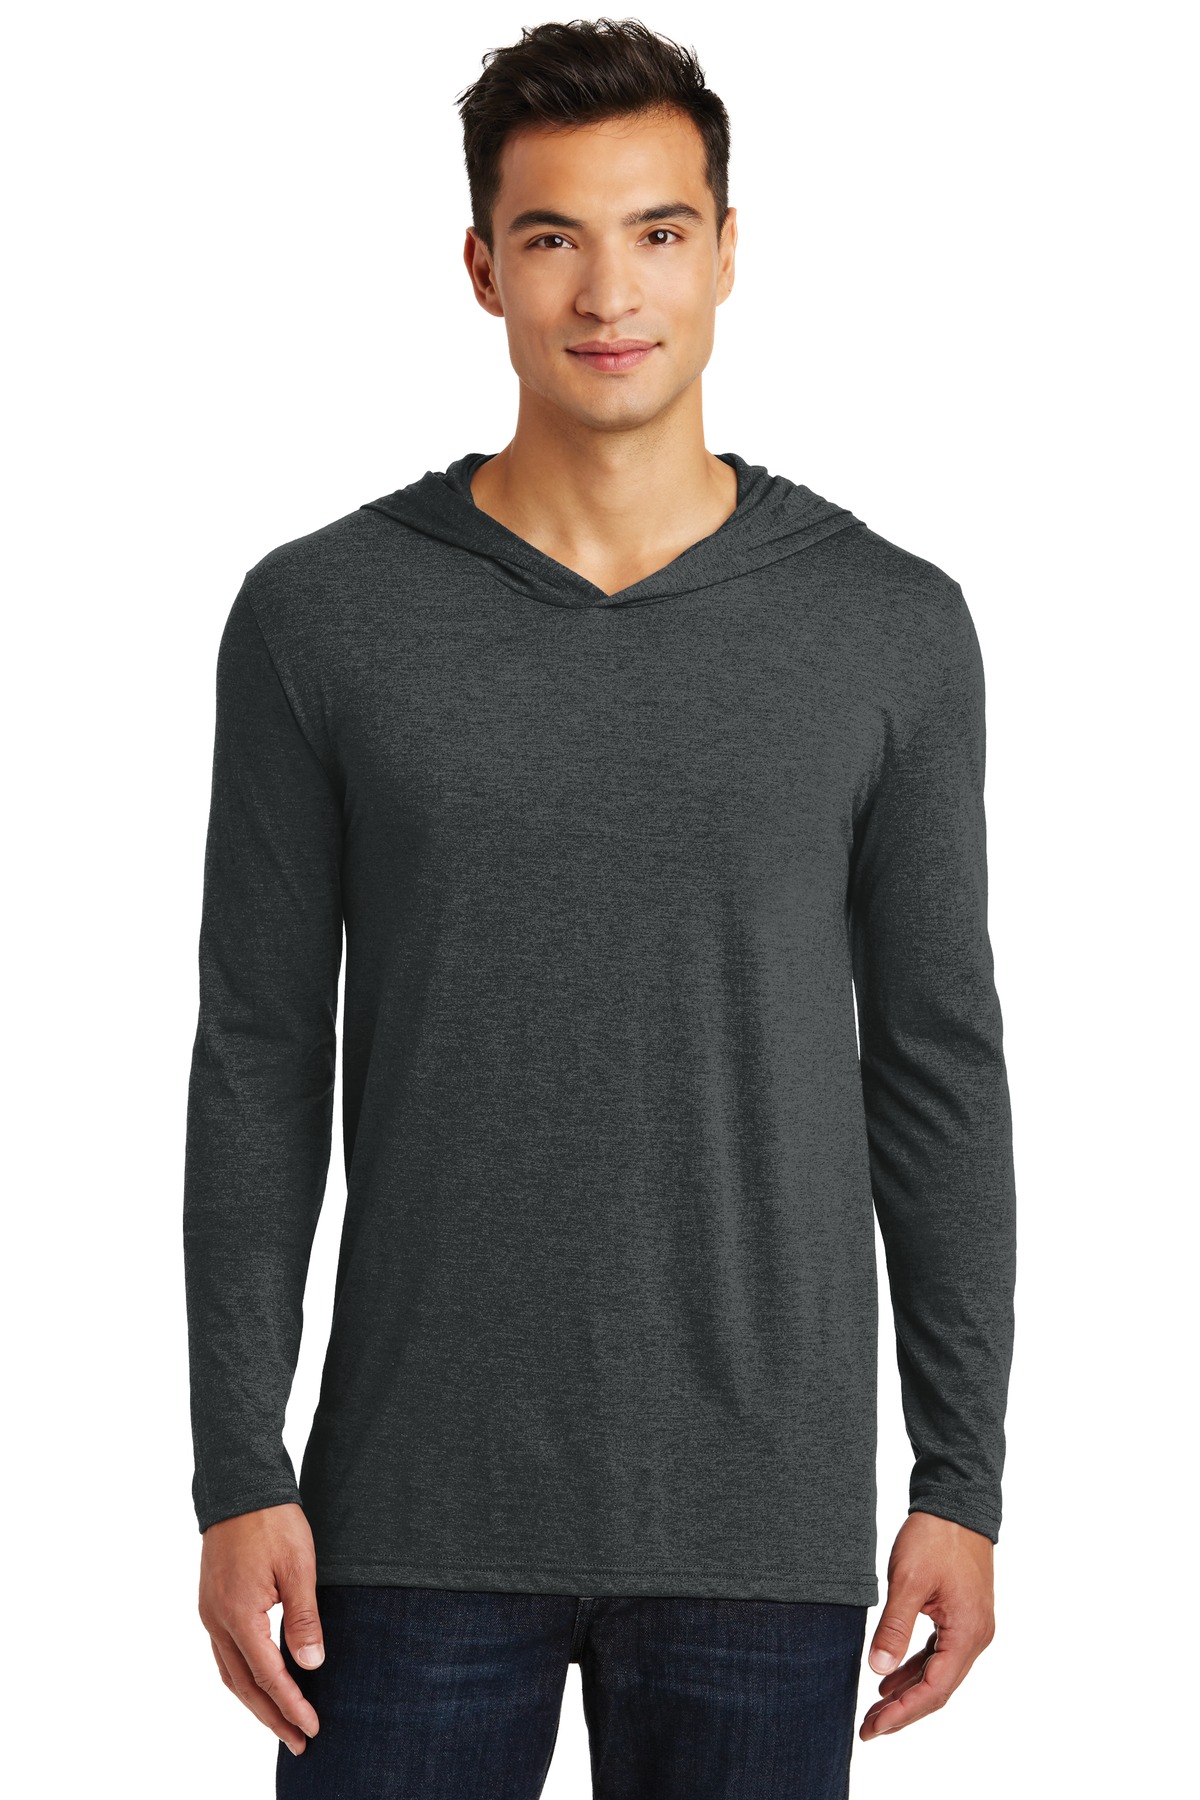 District Made Mens Perfect Tri Long Sleeve Hoodie-S (Black Frost) - image 1 of 6